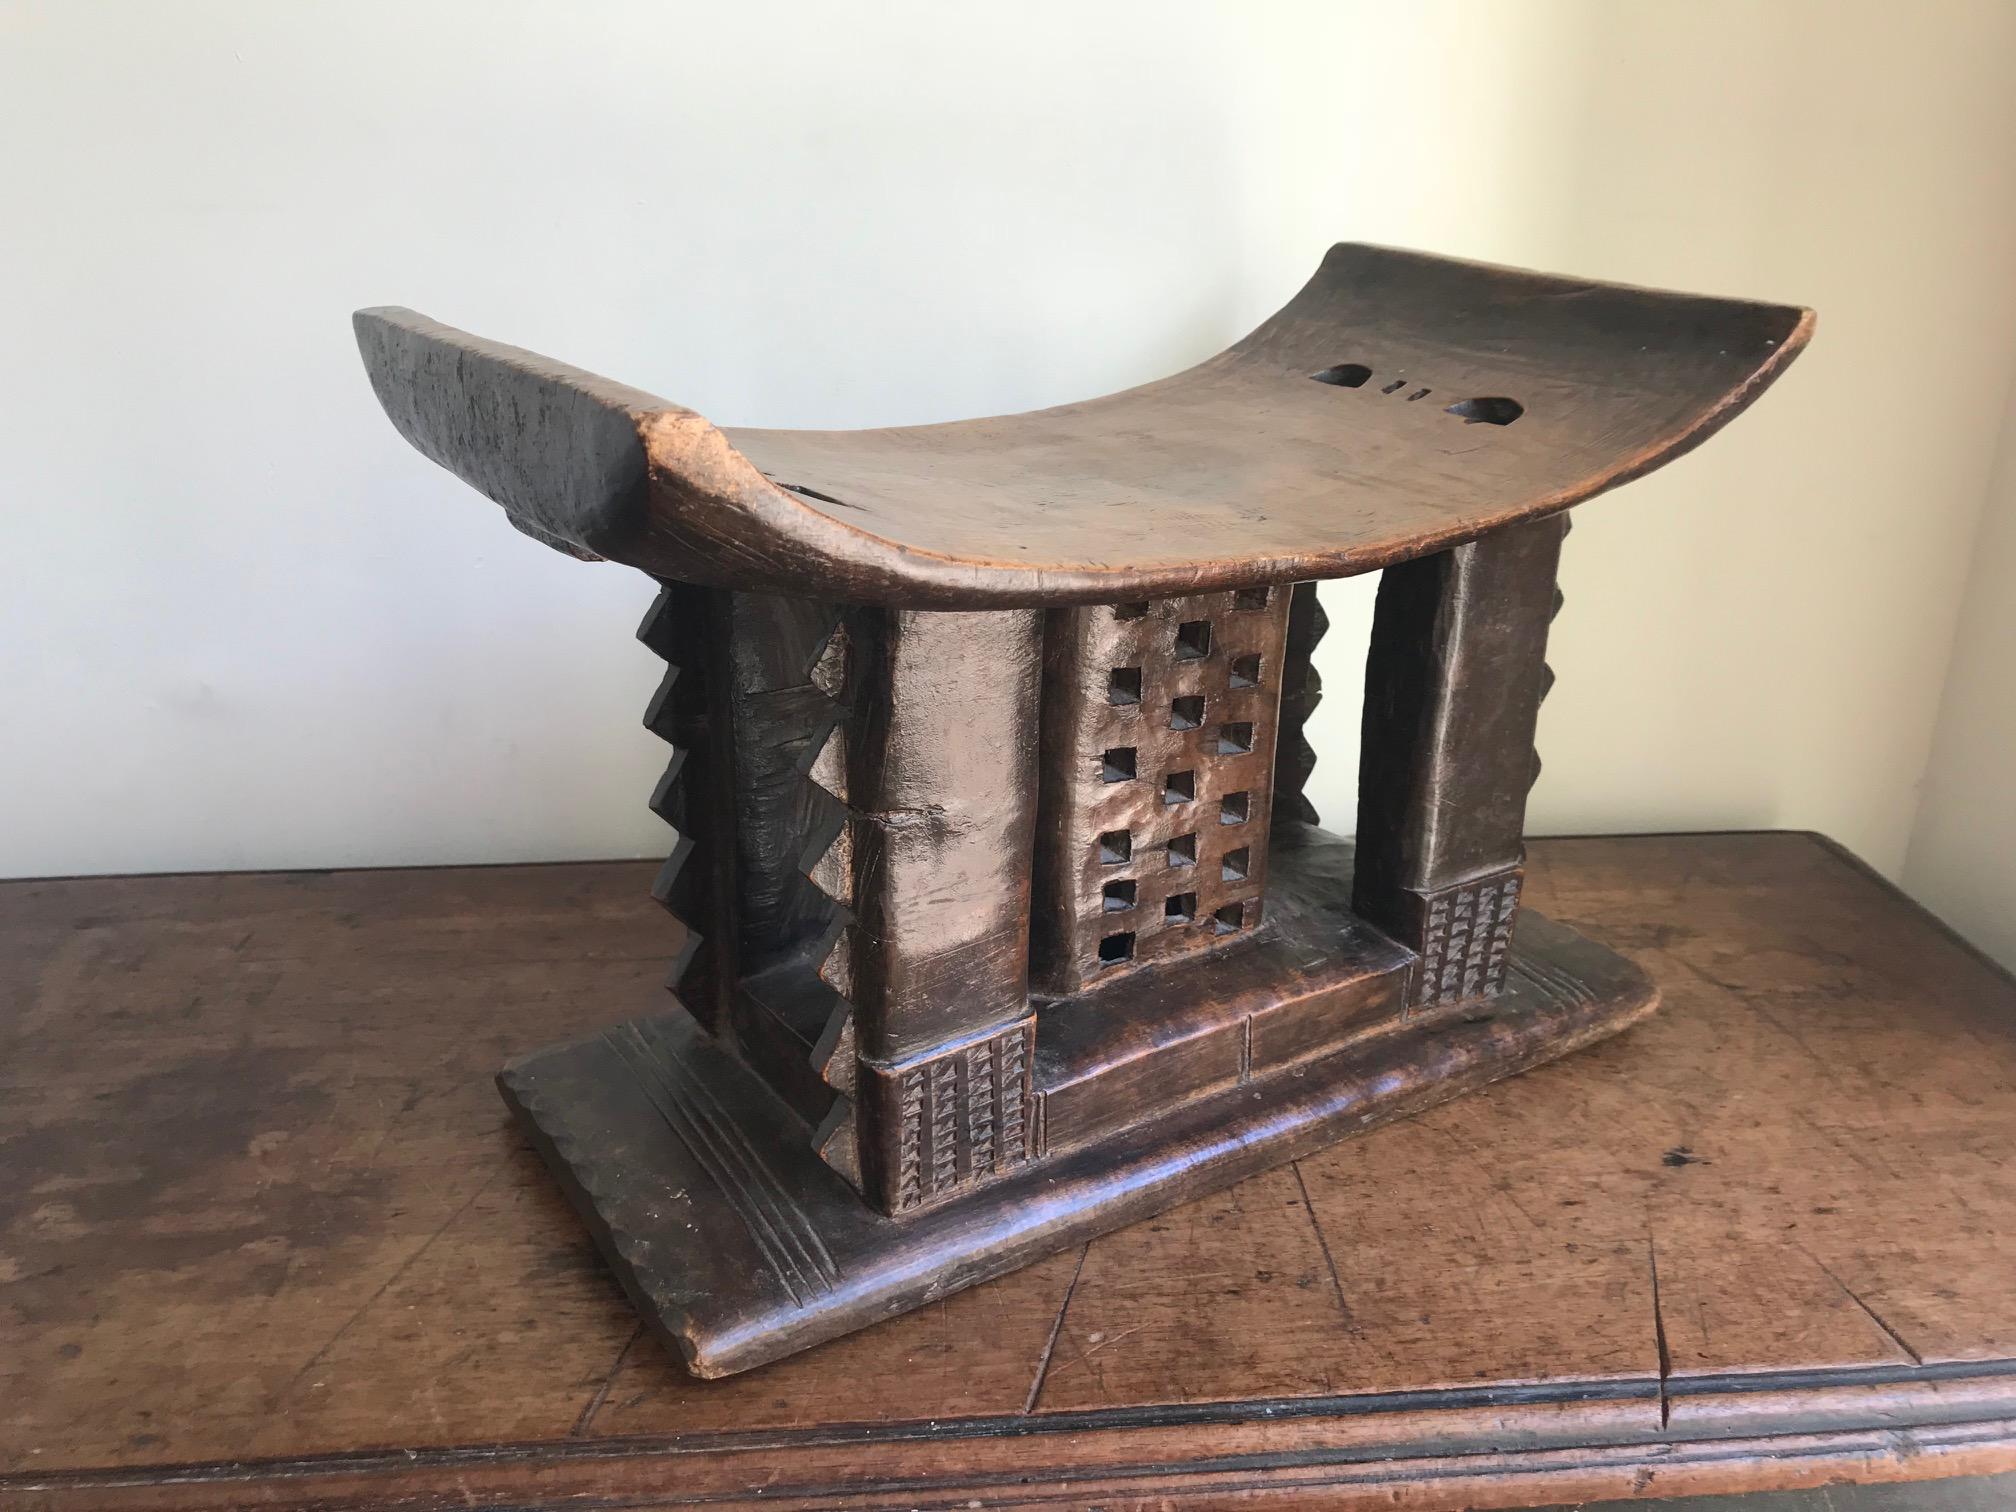 An Ashanti or Asante tribal stool. Carved from one piece of wood, this example has typical Ashanti geometric carvings with a central pierced support column. It has suffered one break, which is a good feature as shows it was used and not made for the